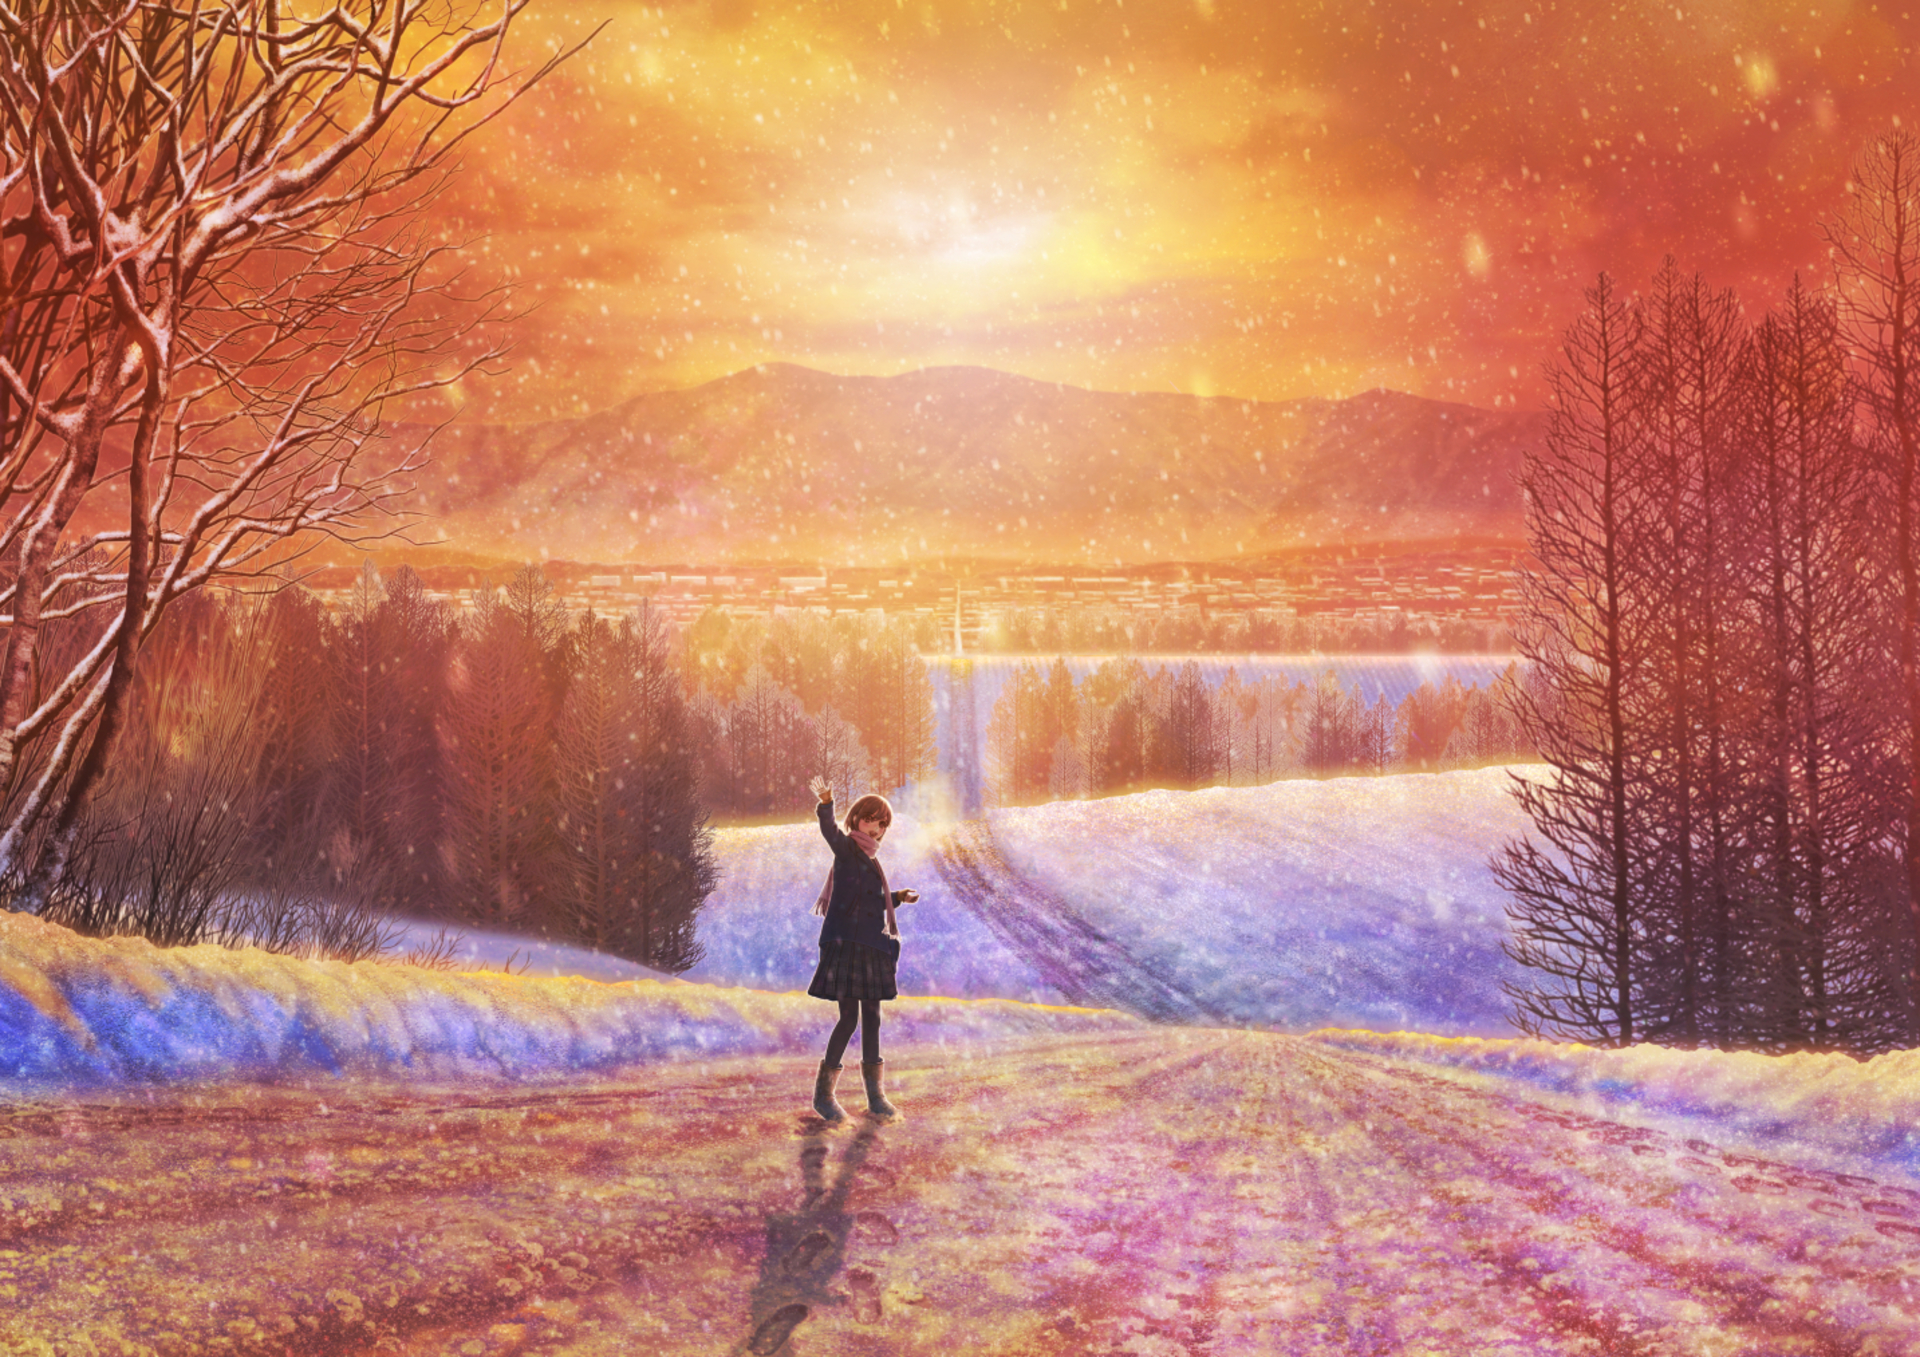 Anime Girl Waving Goodbye As She Leaves Down A Long Snowy Road By